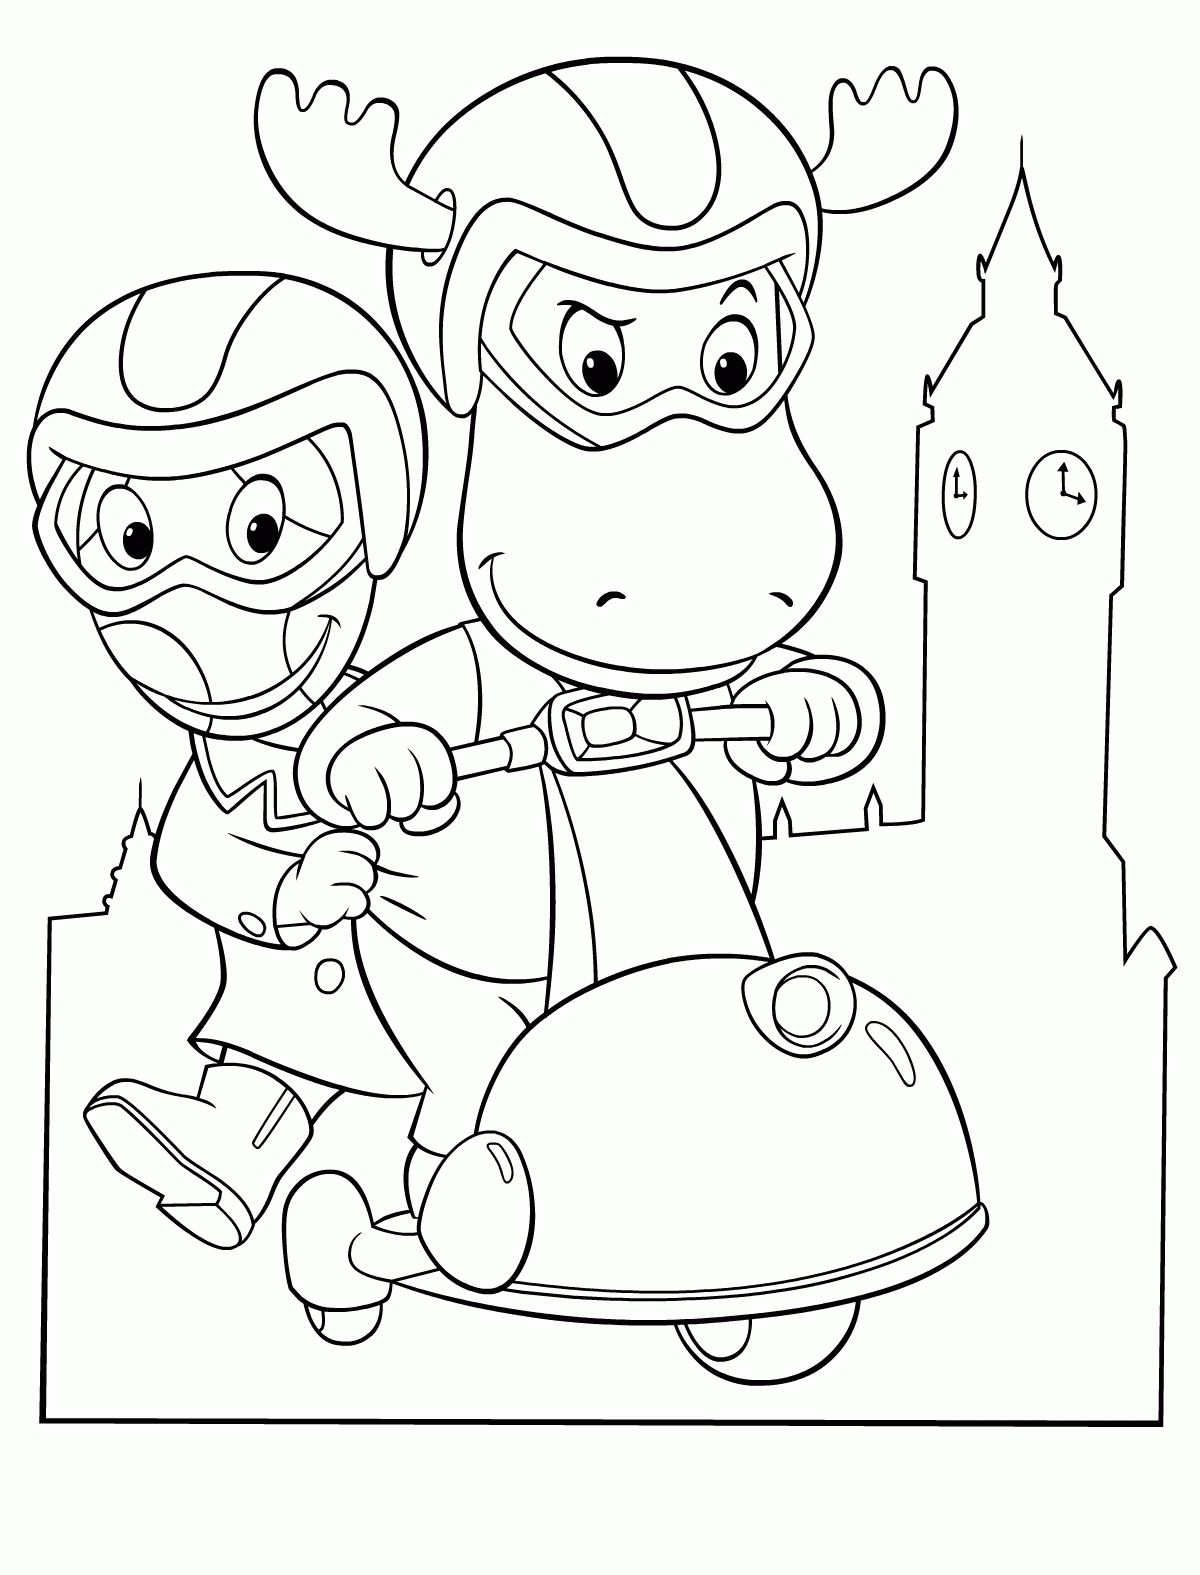 Backyardigans Coloring Pages Free Coloring Home